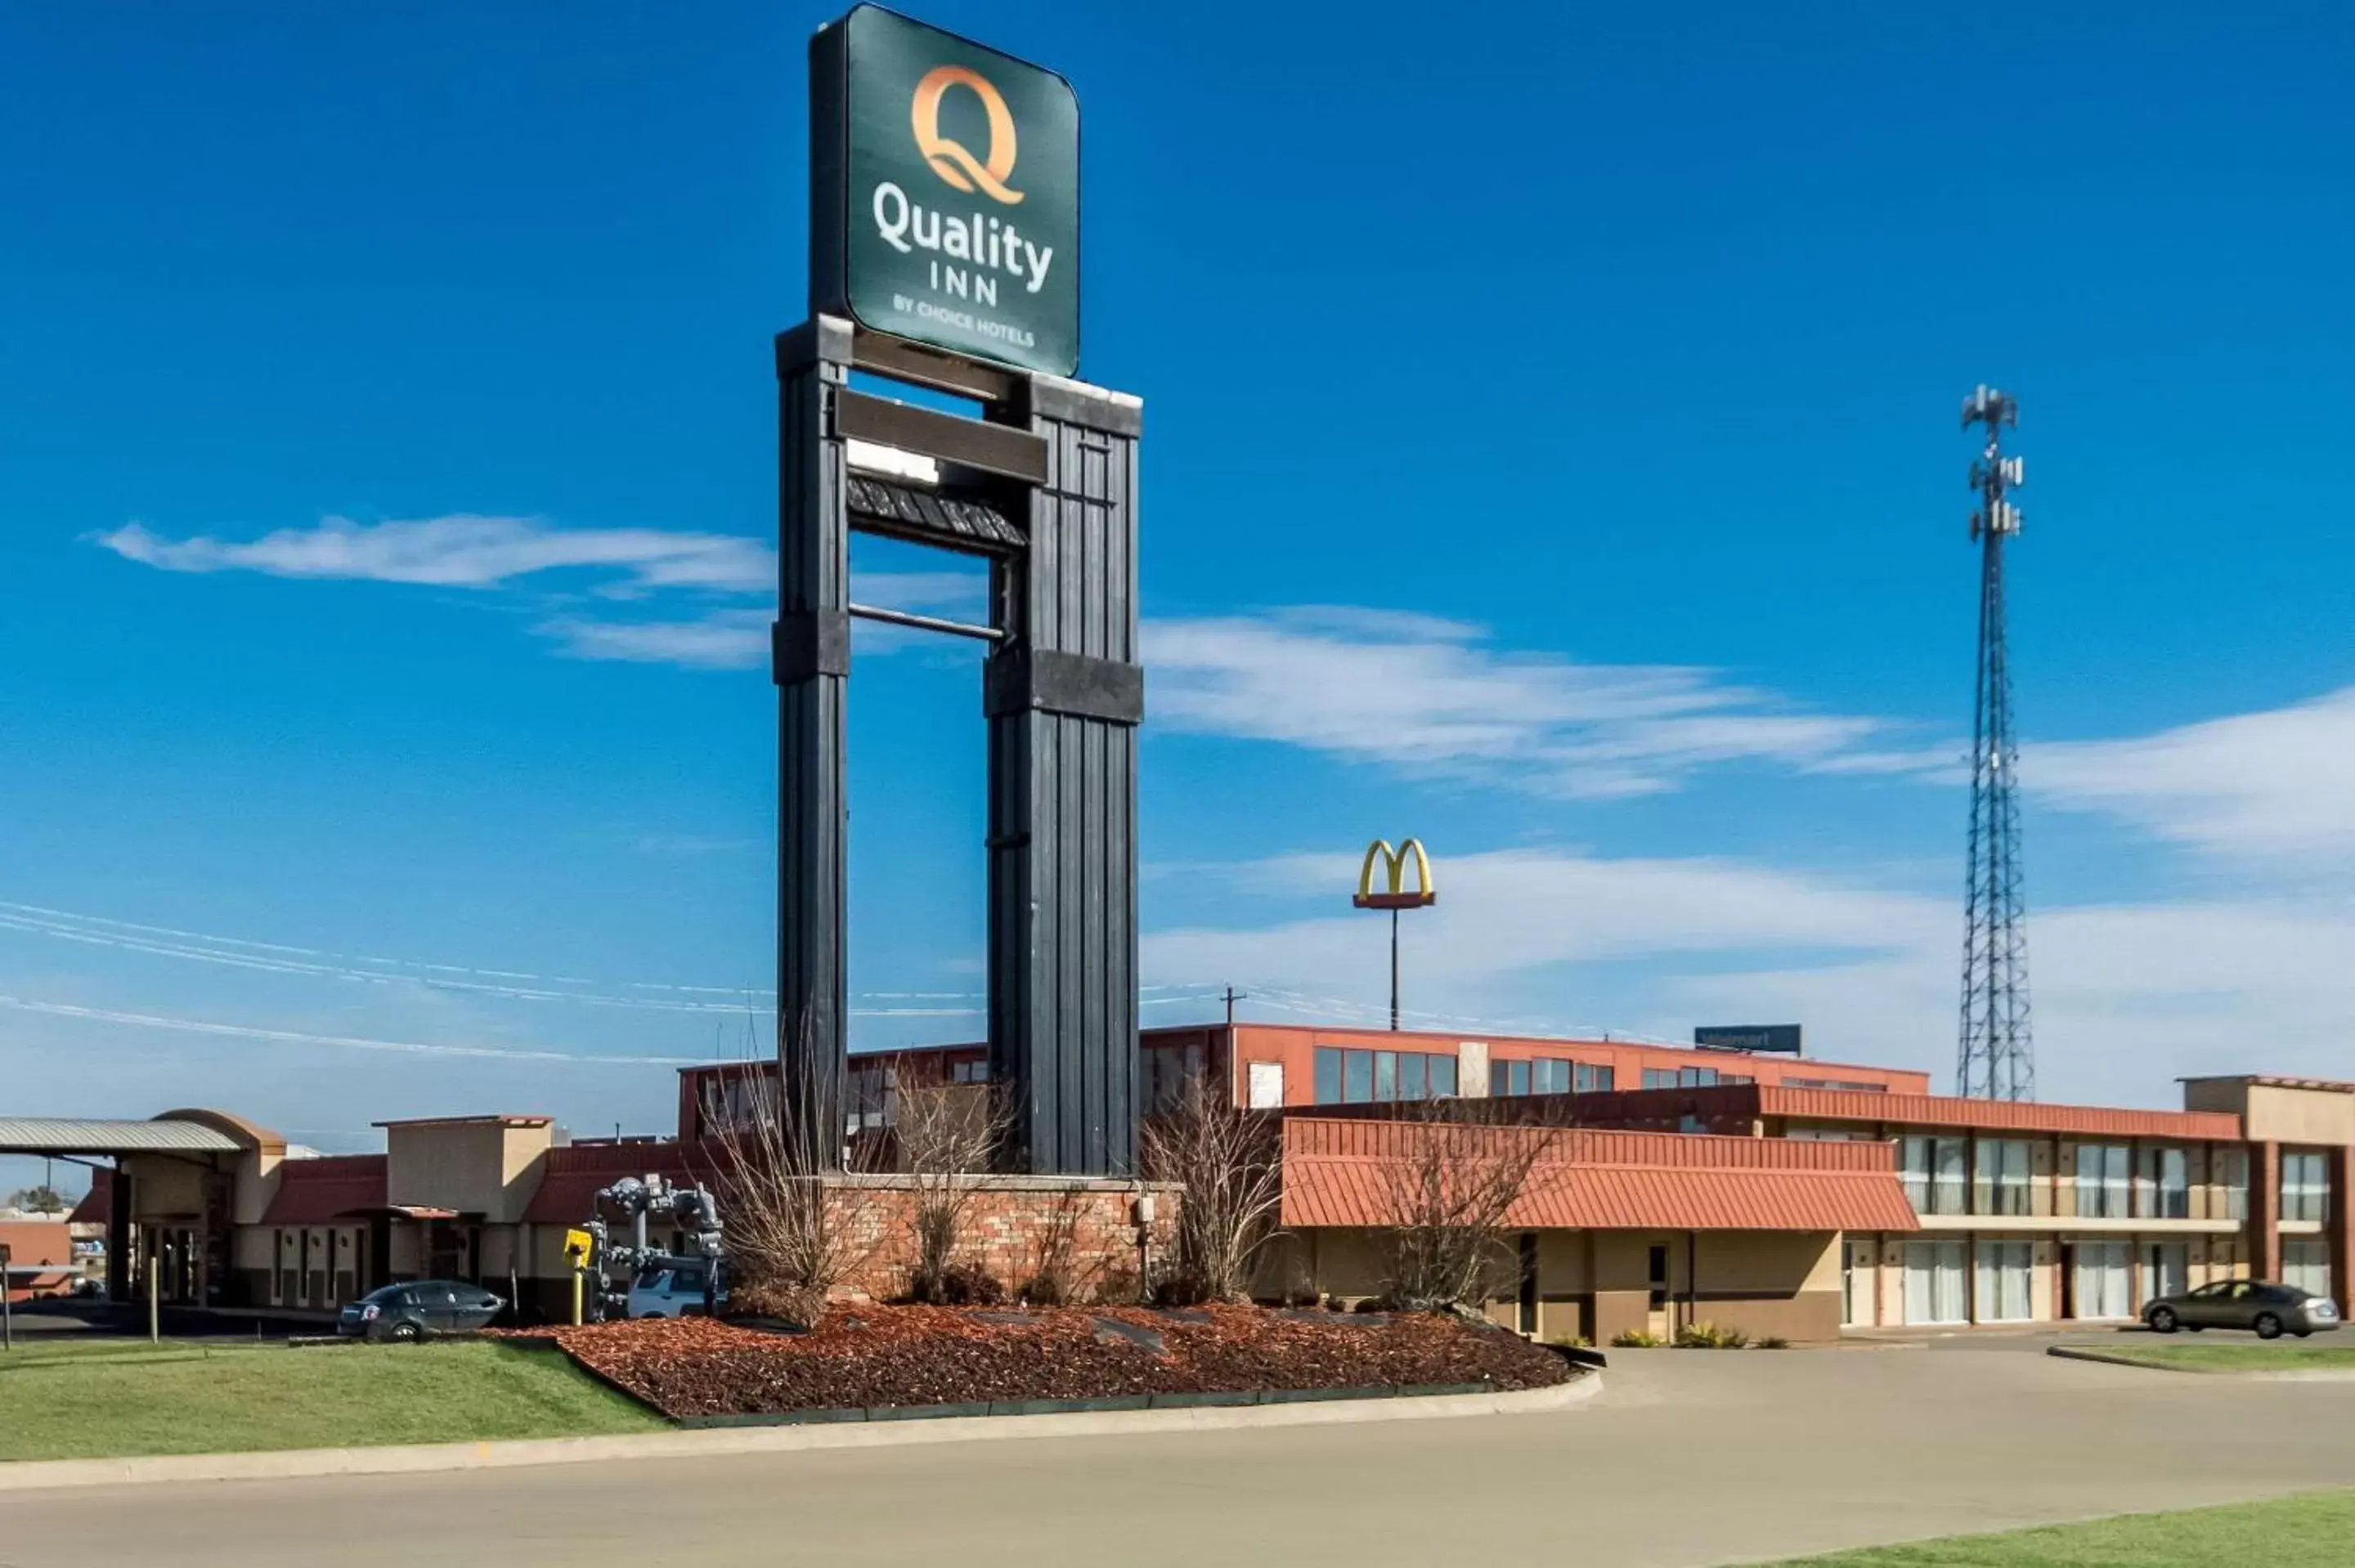 Property building in Quality Inn